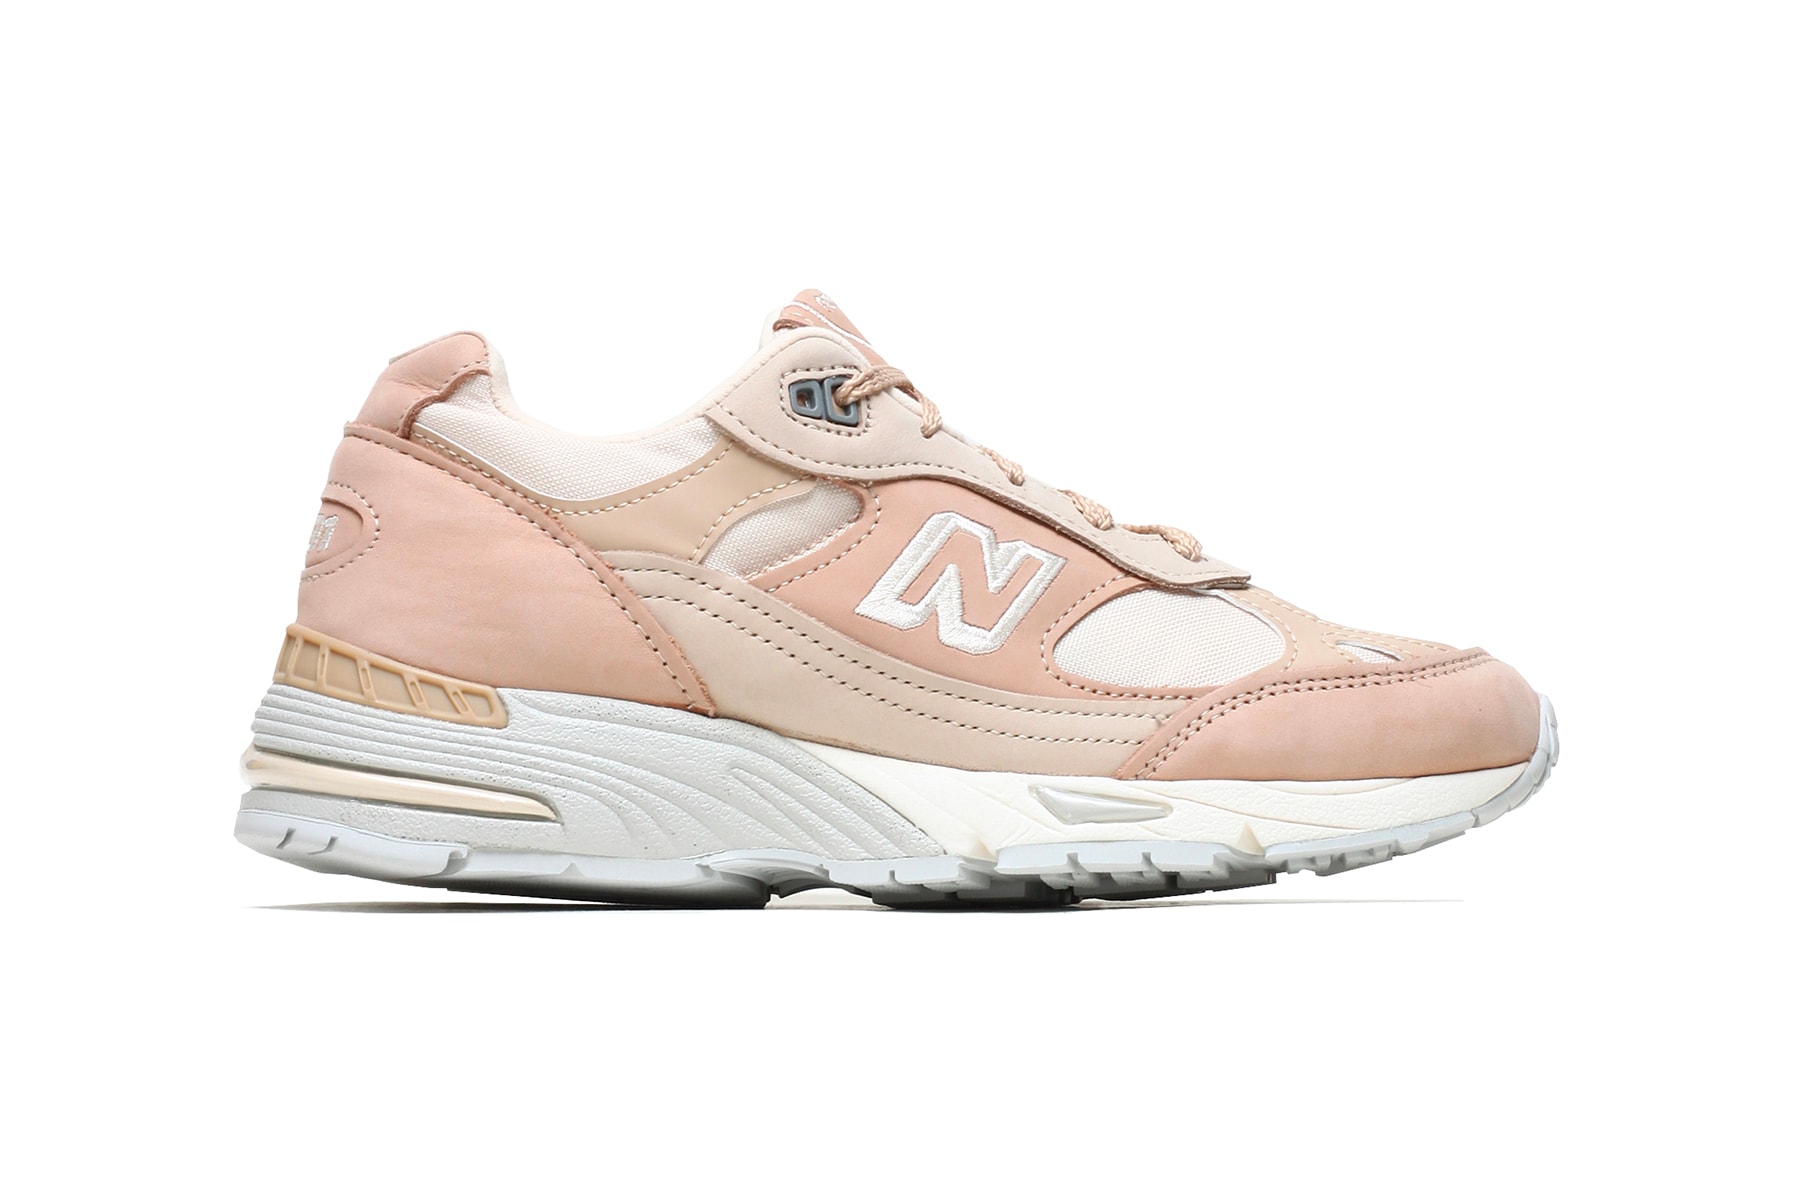 New Balance 991 991SSG Sand Grey Price Release NAKED Pink Pastel Chunky Dad Sneaker Shoe Millennial